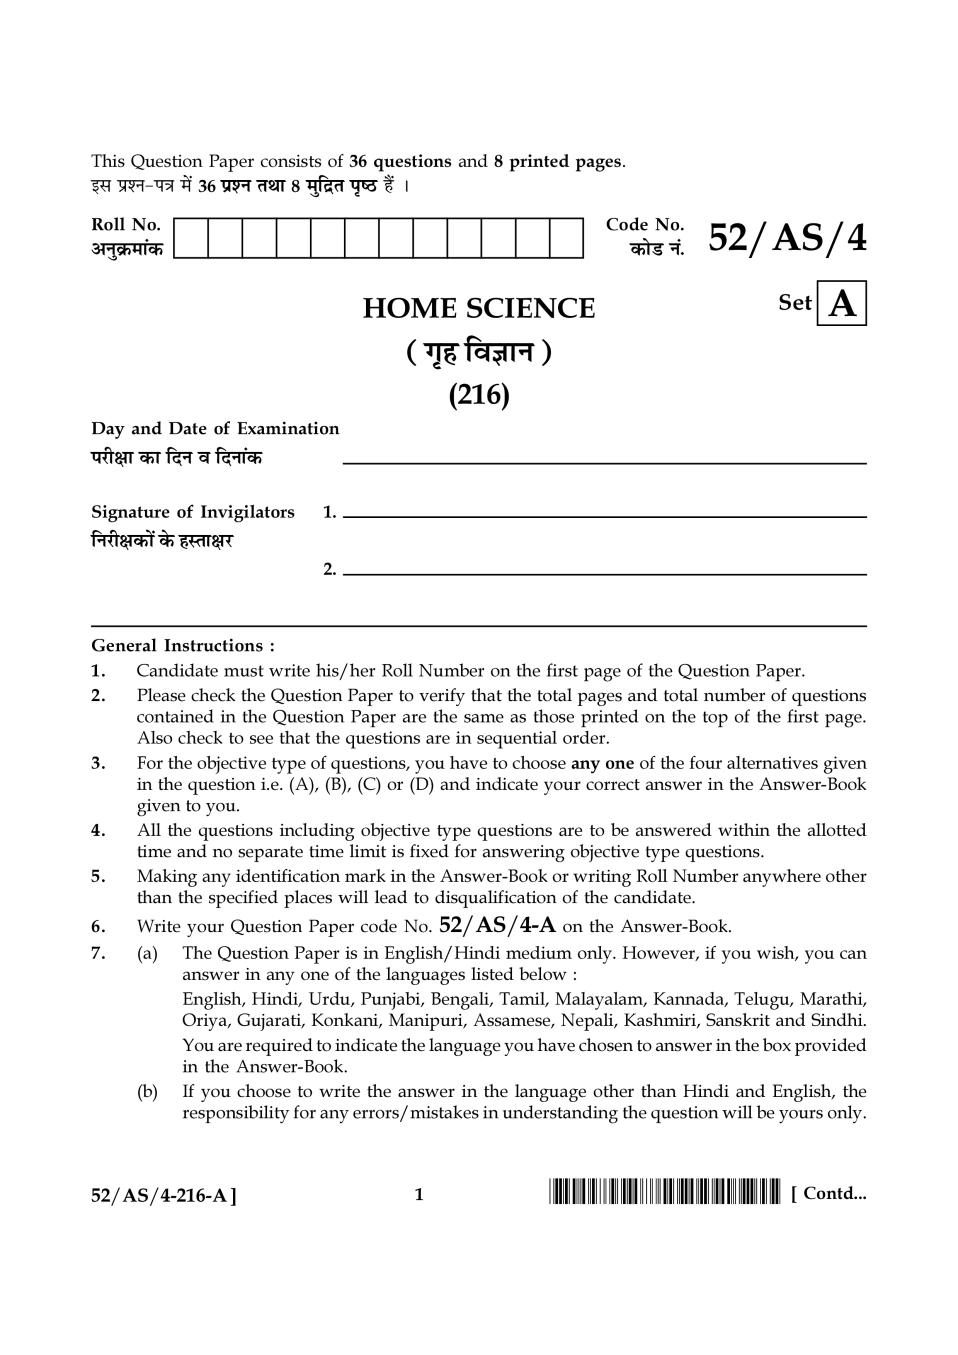 NIOS Class 10 Question Paper Apr 2016 - Home Science - Page 1